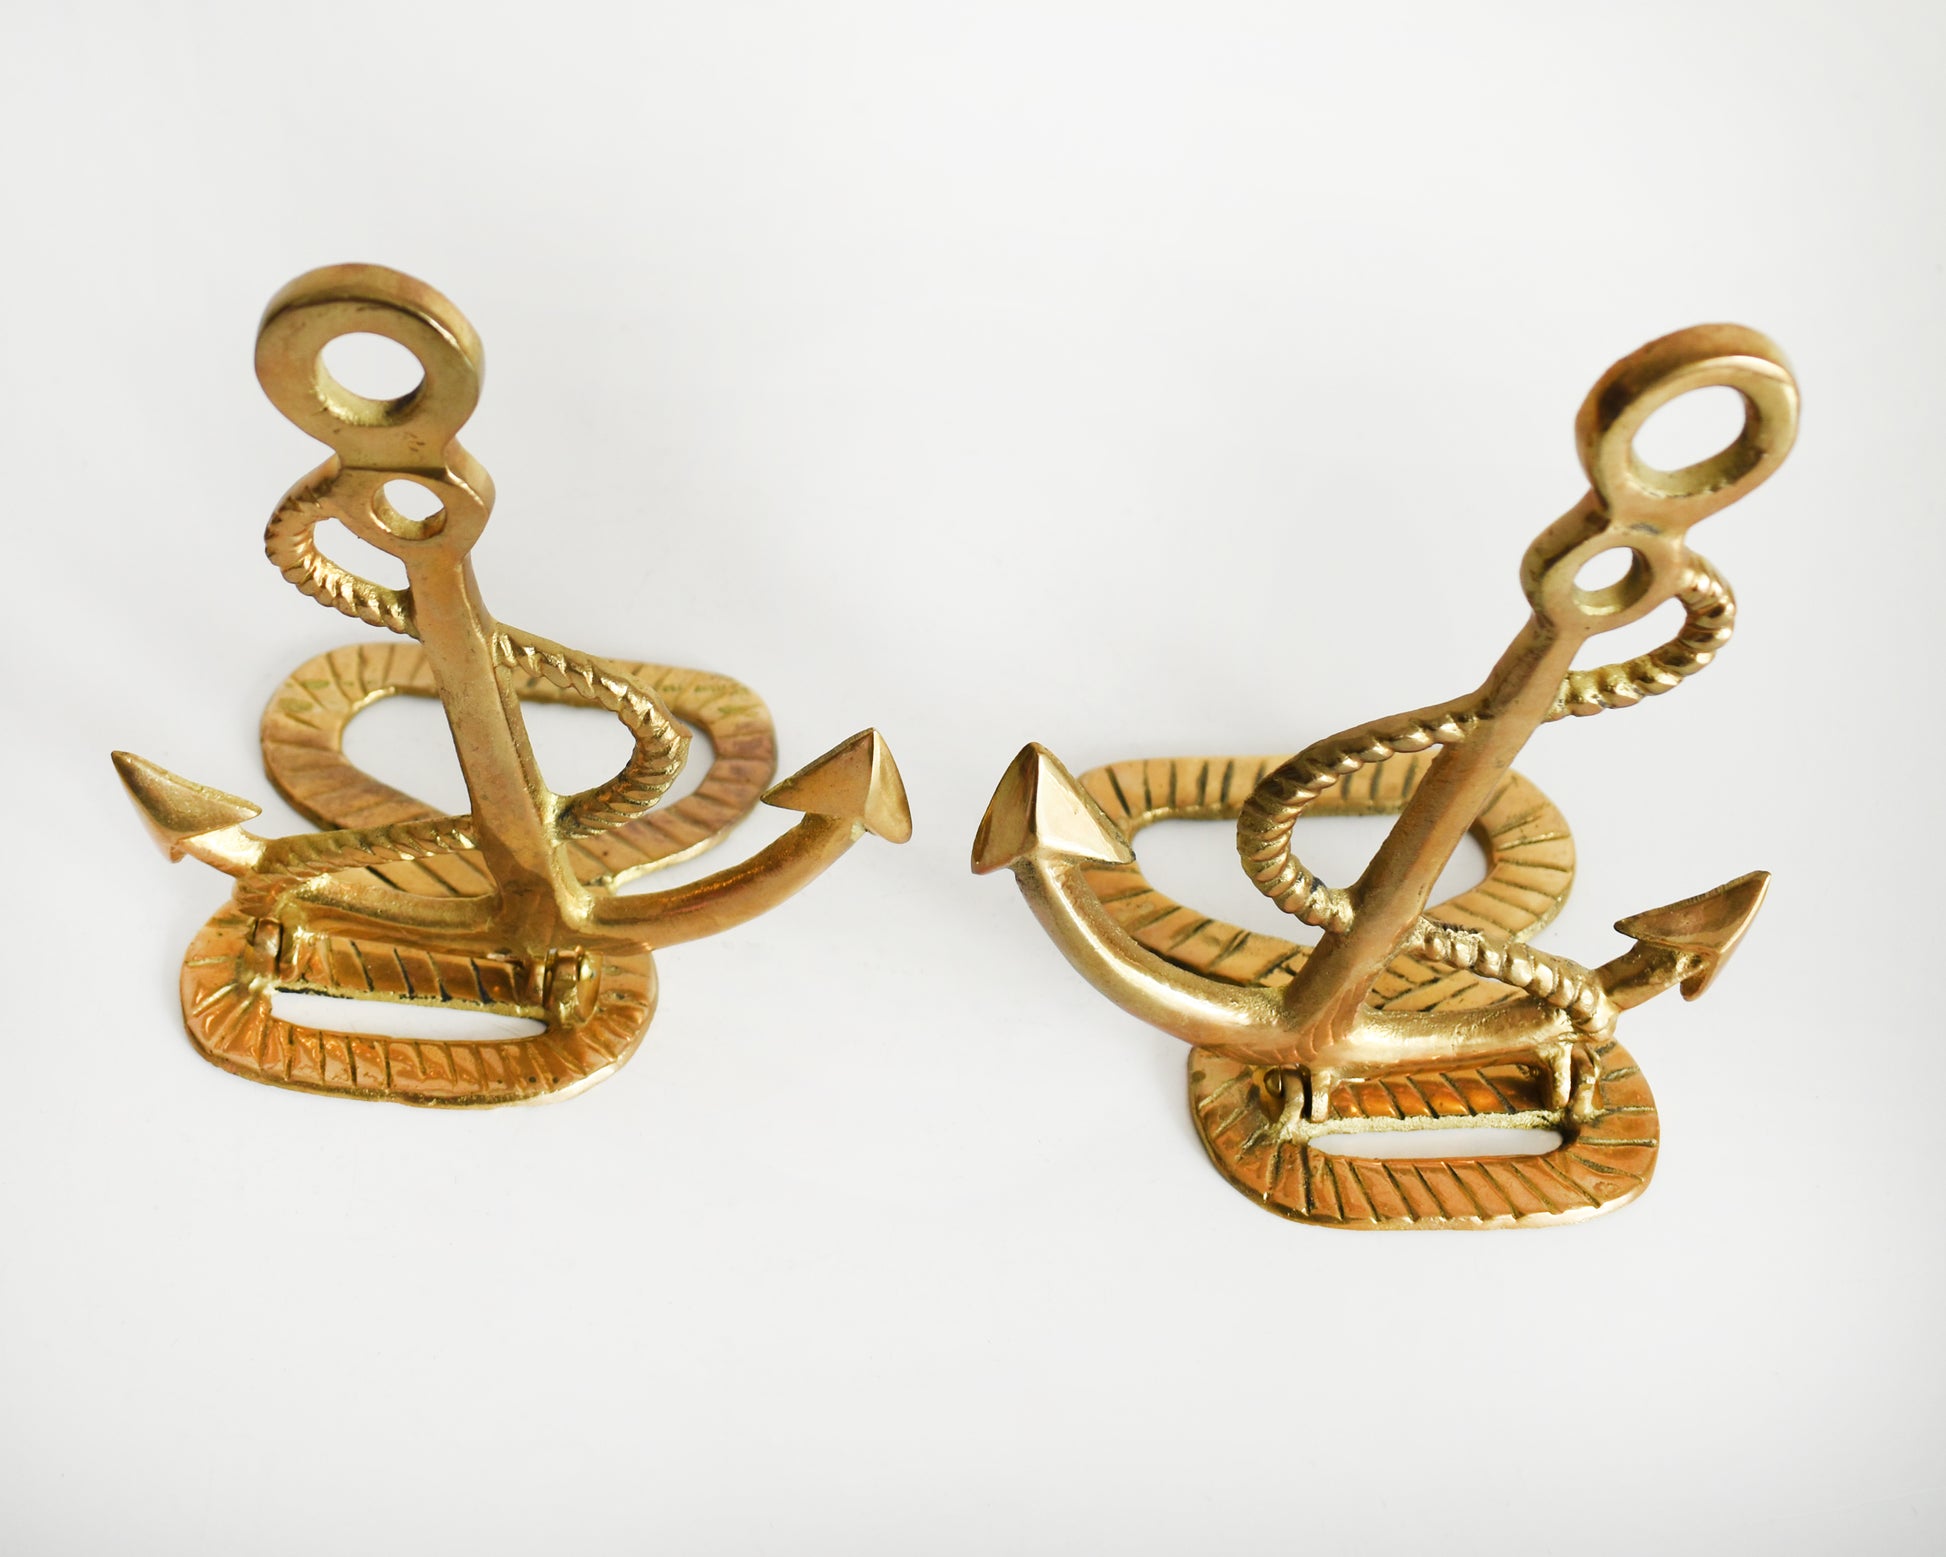 Overhead shot of two vintage brass anchor and rope bookends.